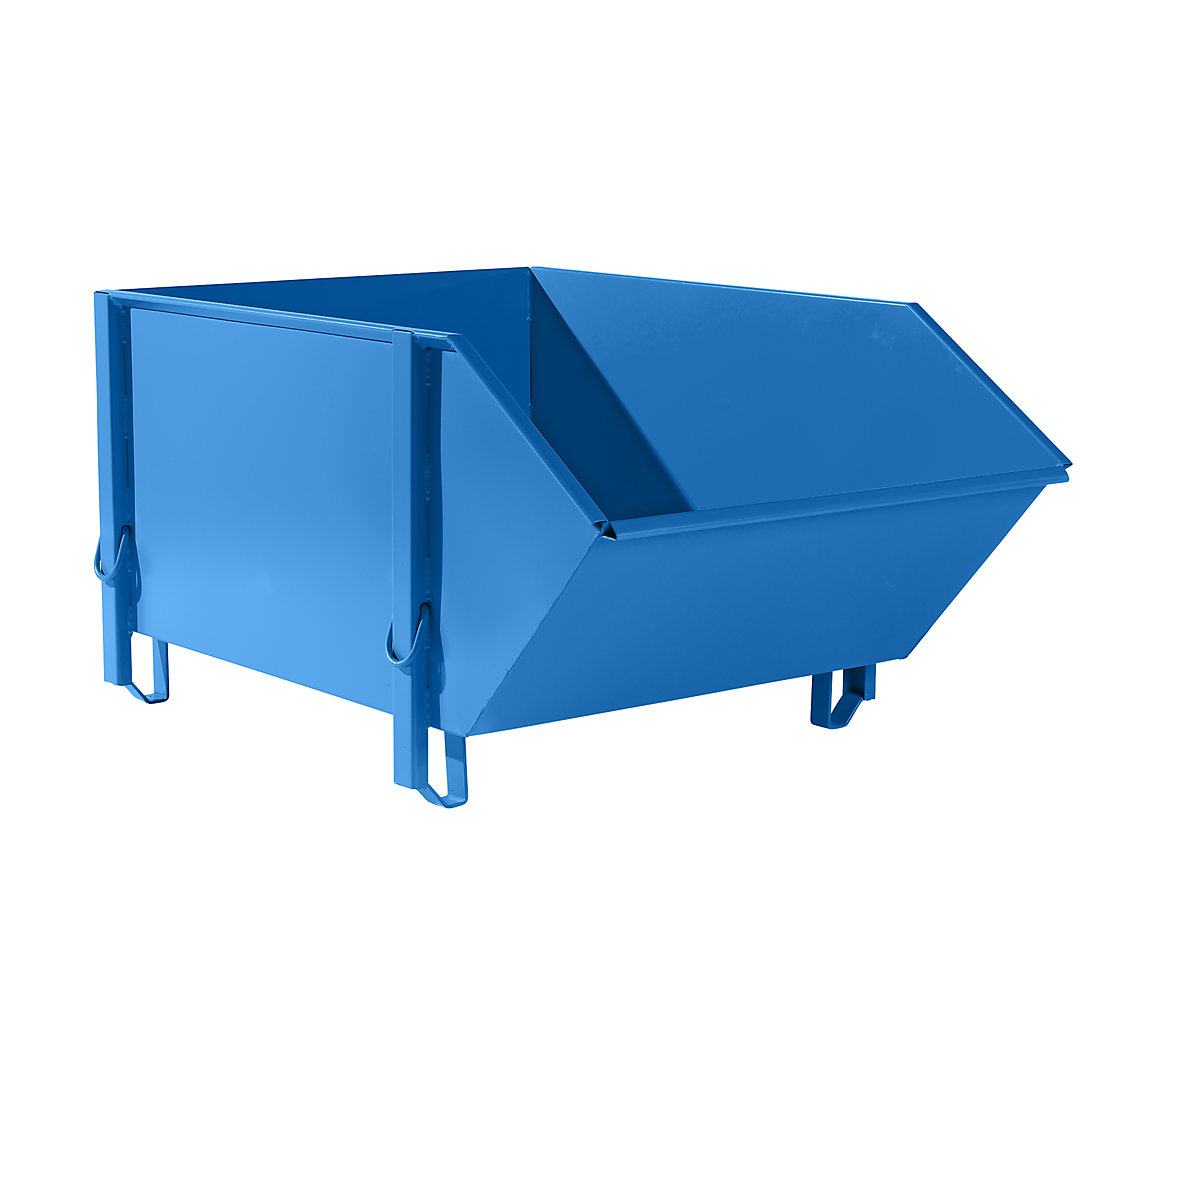 Sheet steel container – eurokraft pro, capacity 1 m³, without folding chute, light blue-5